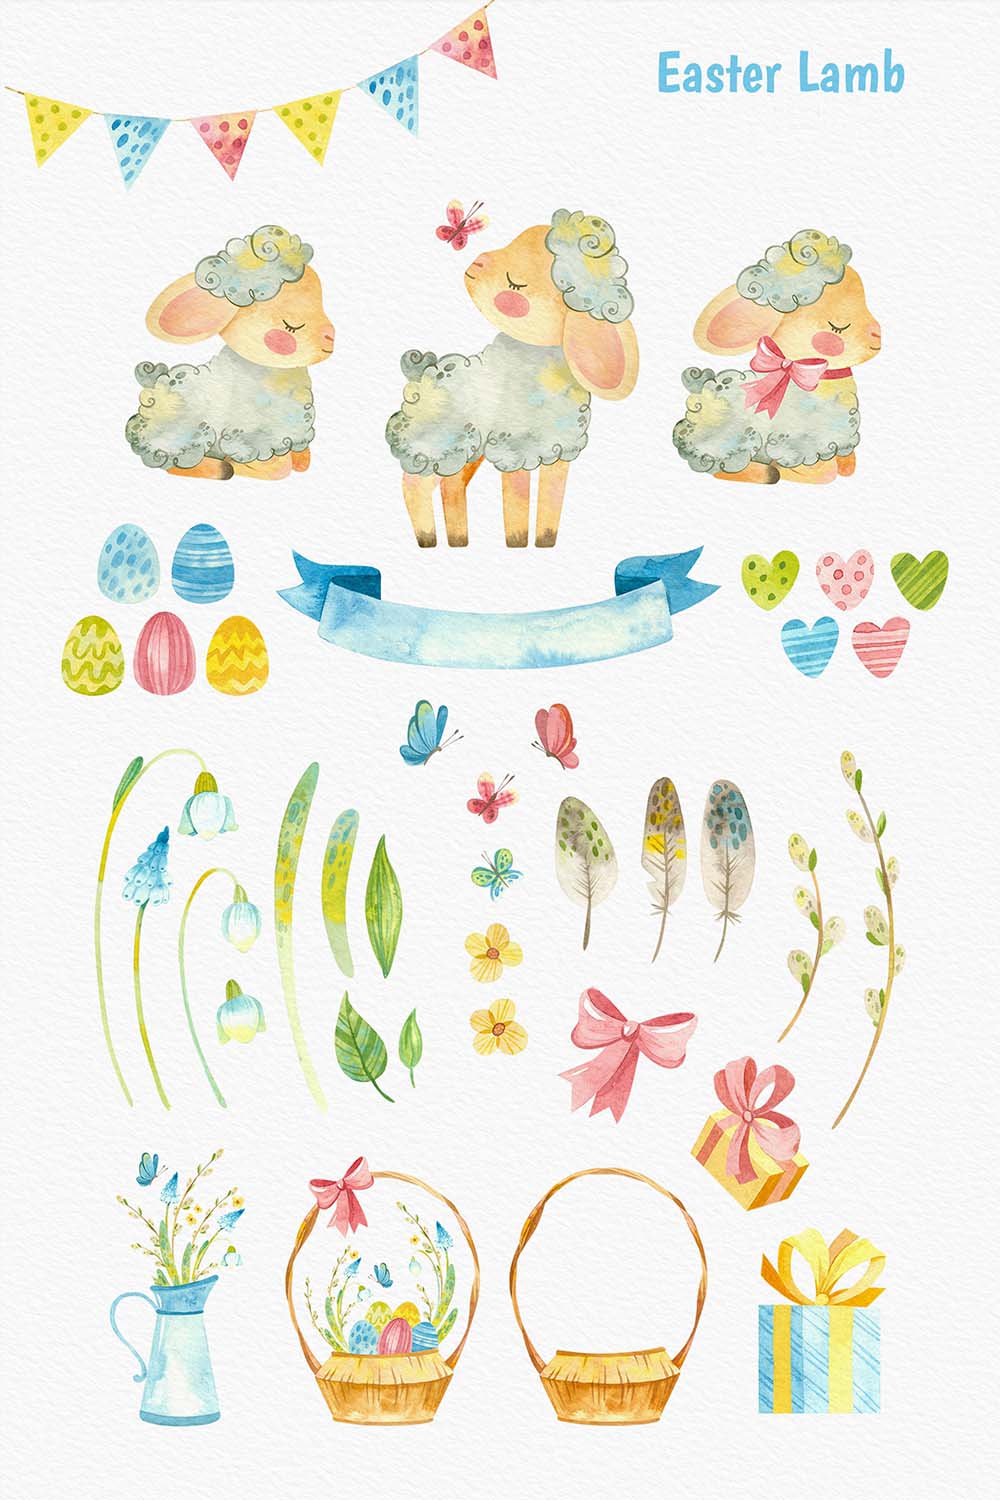 Collage of painted sheep, flowers, baskets, eggs.